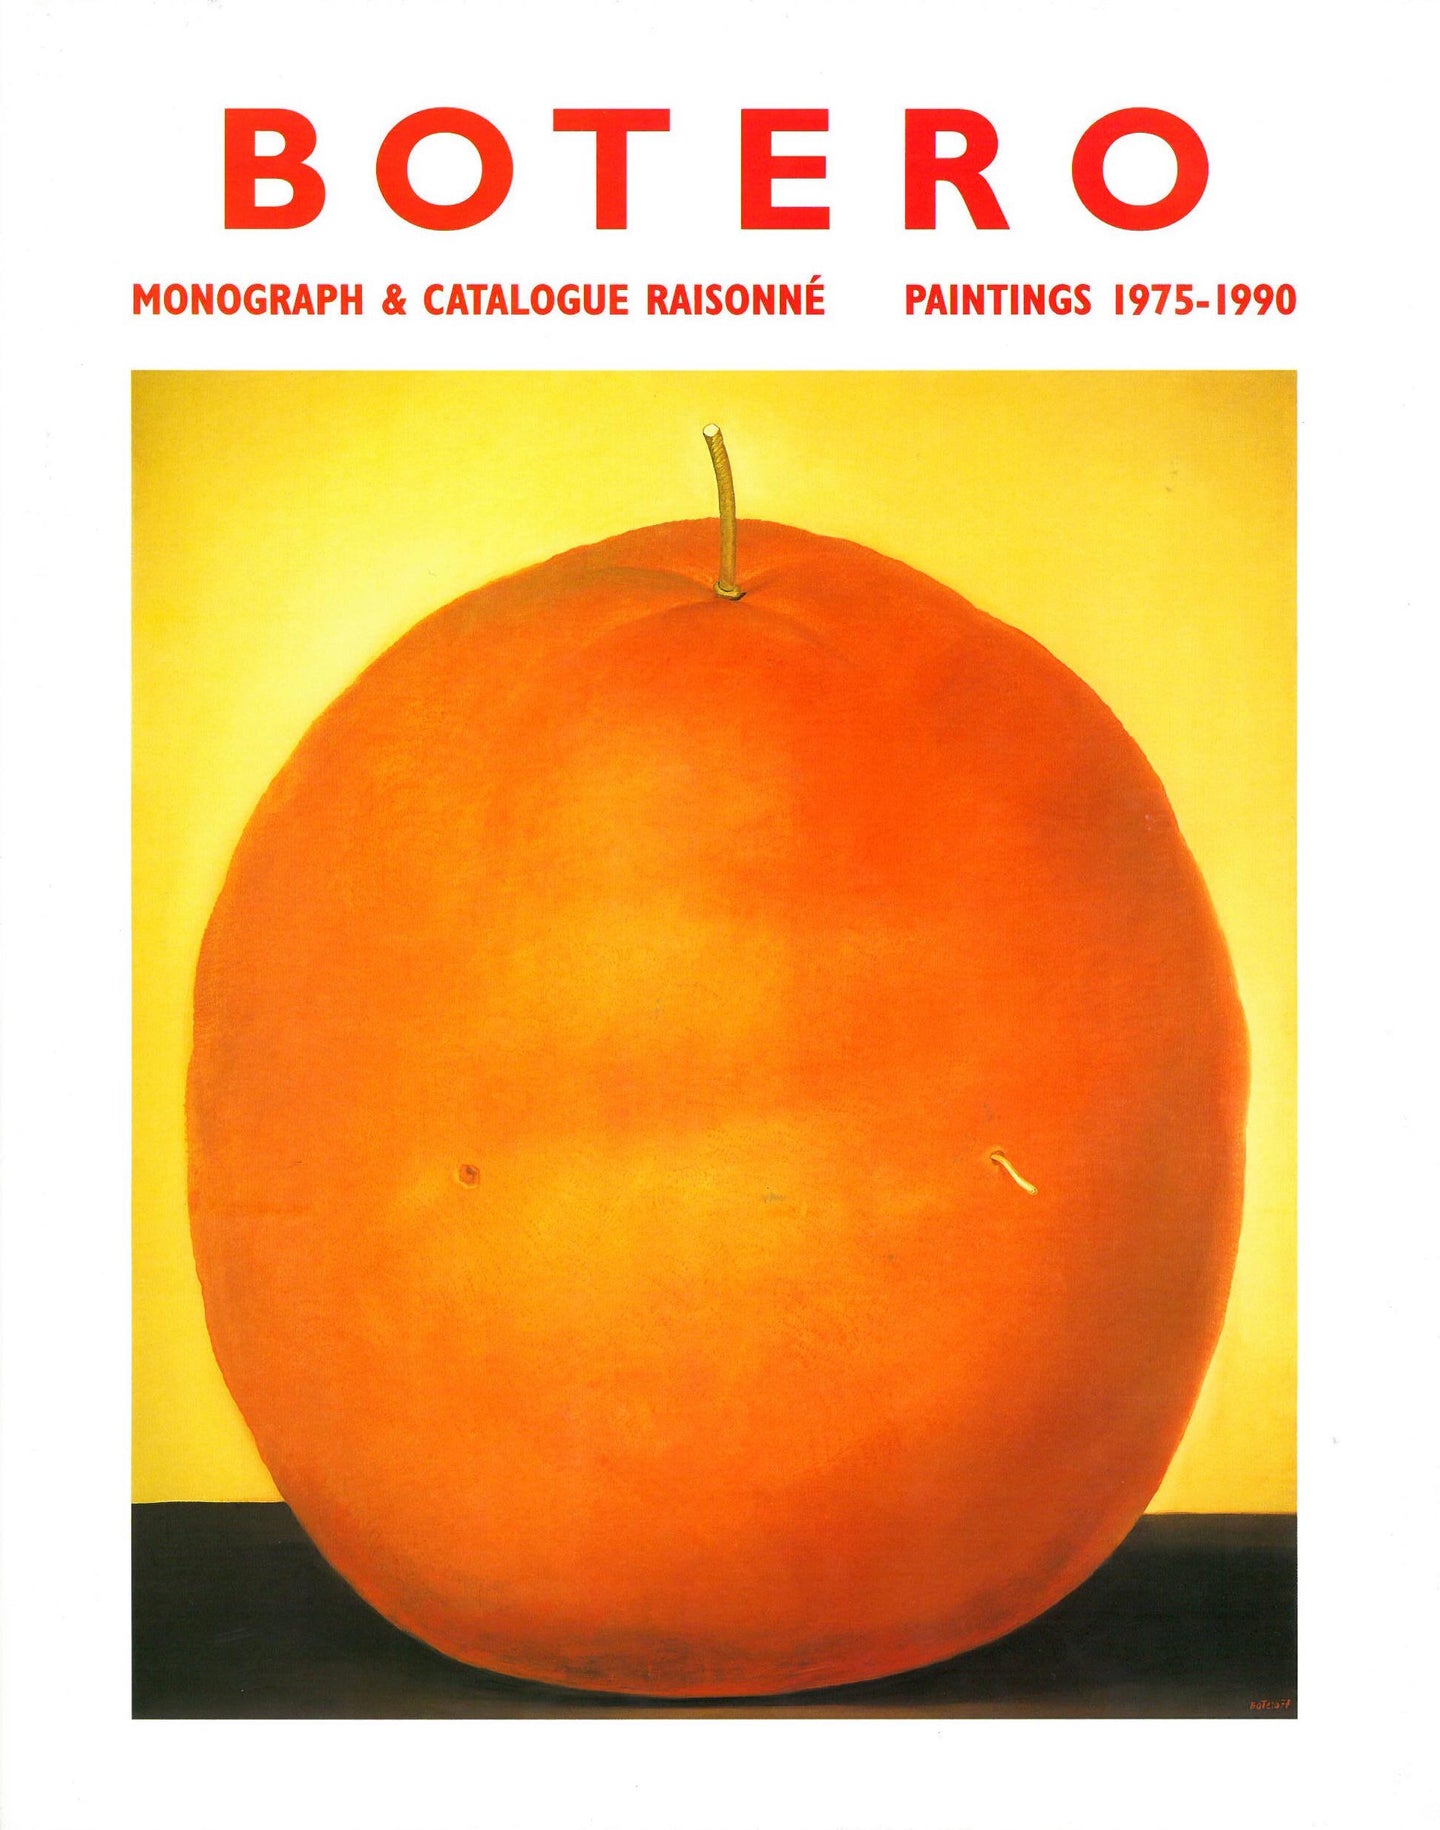 Botero monograph cover featuring a painting of an orange